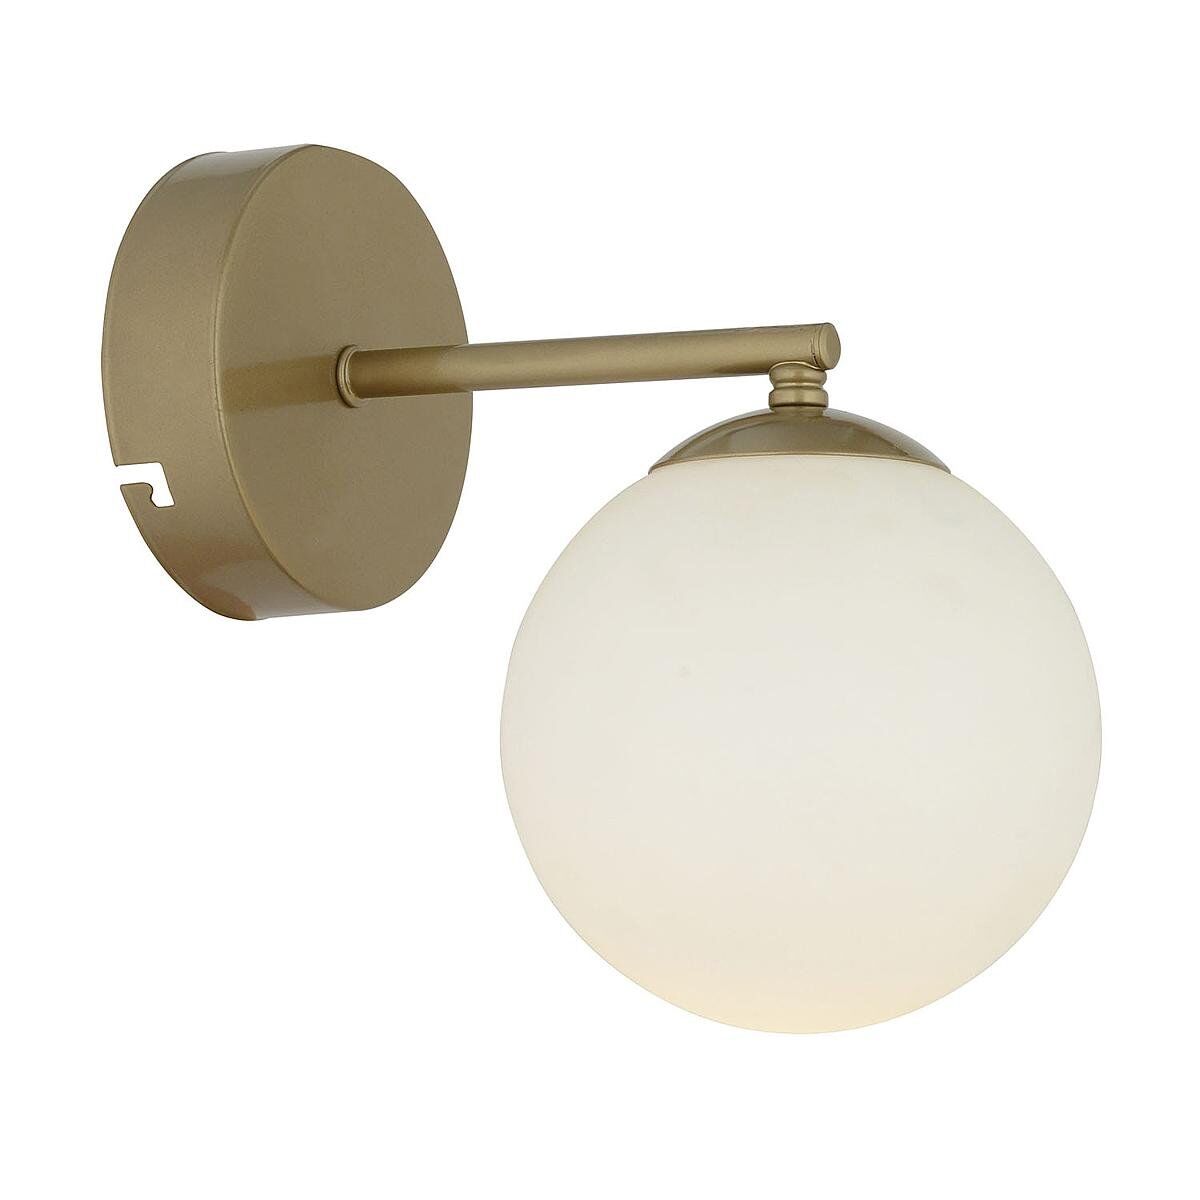 ELV Wall Lamp Antique/White Metal/Glass 15x17cm